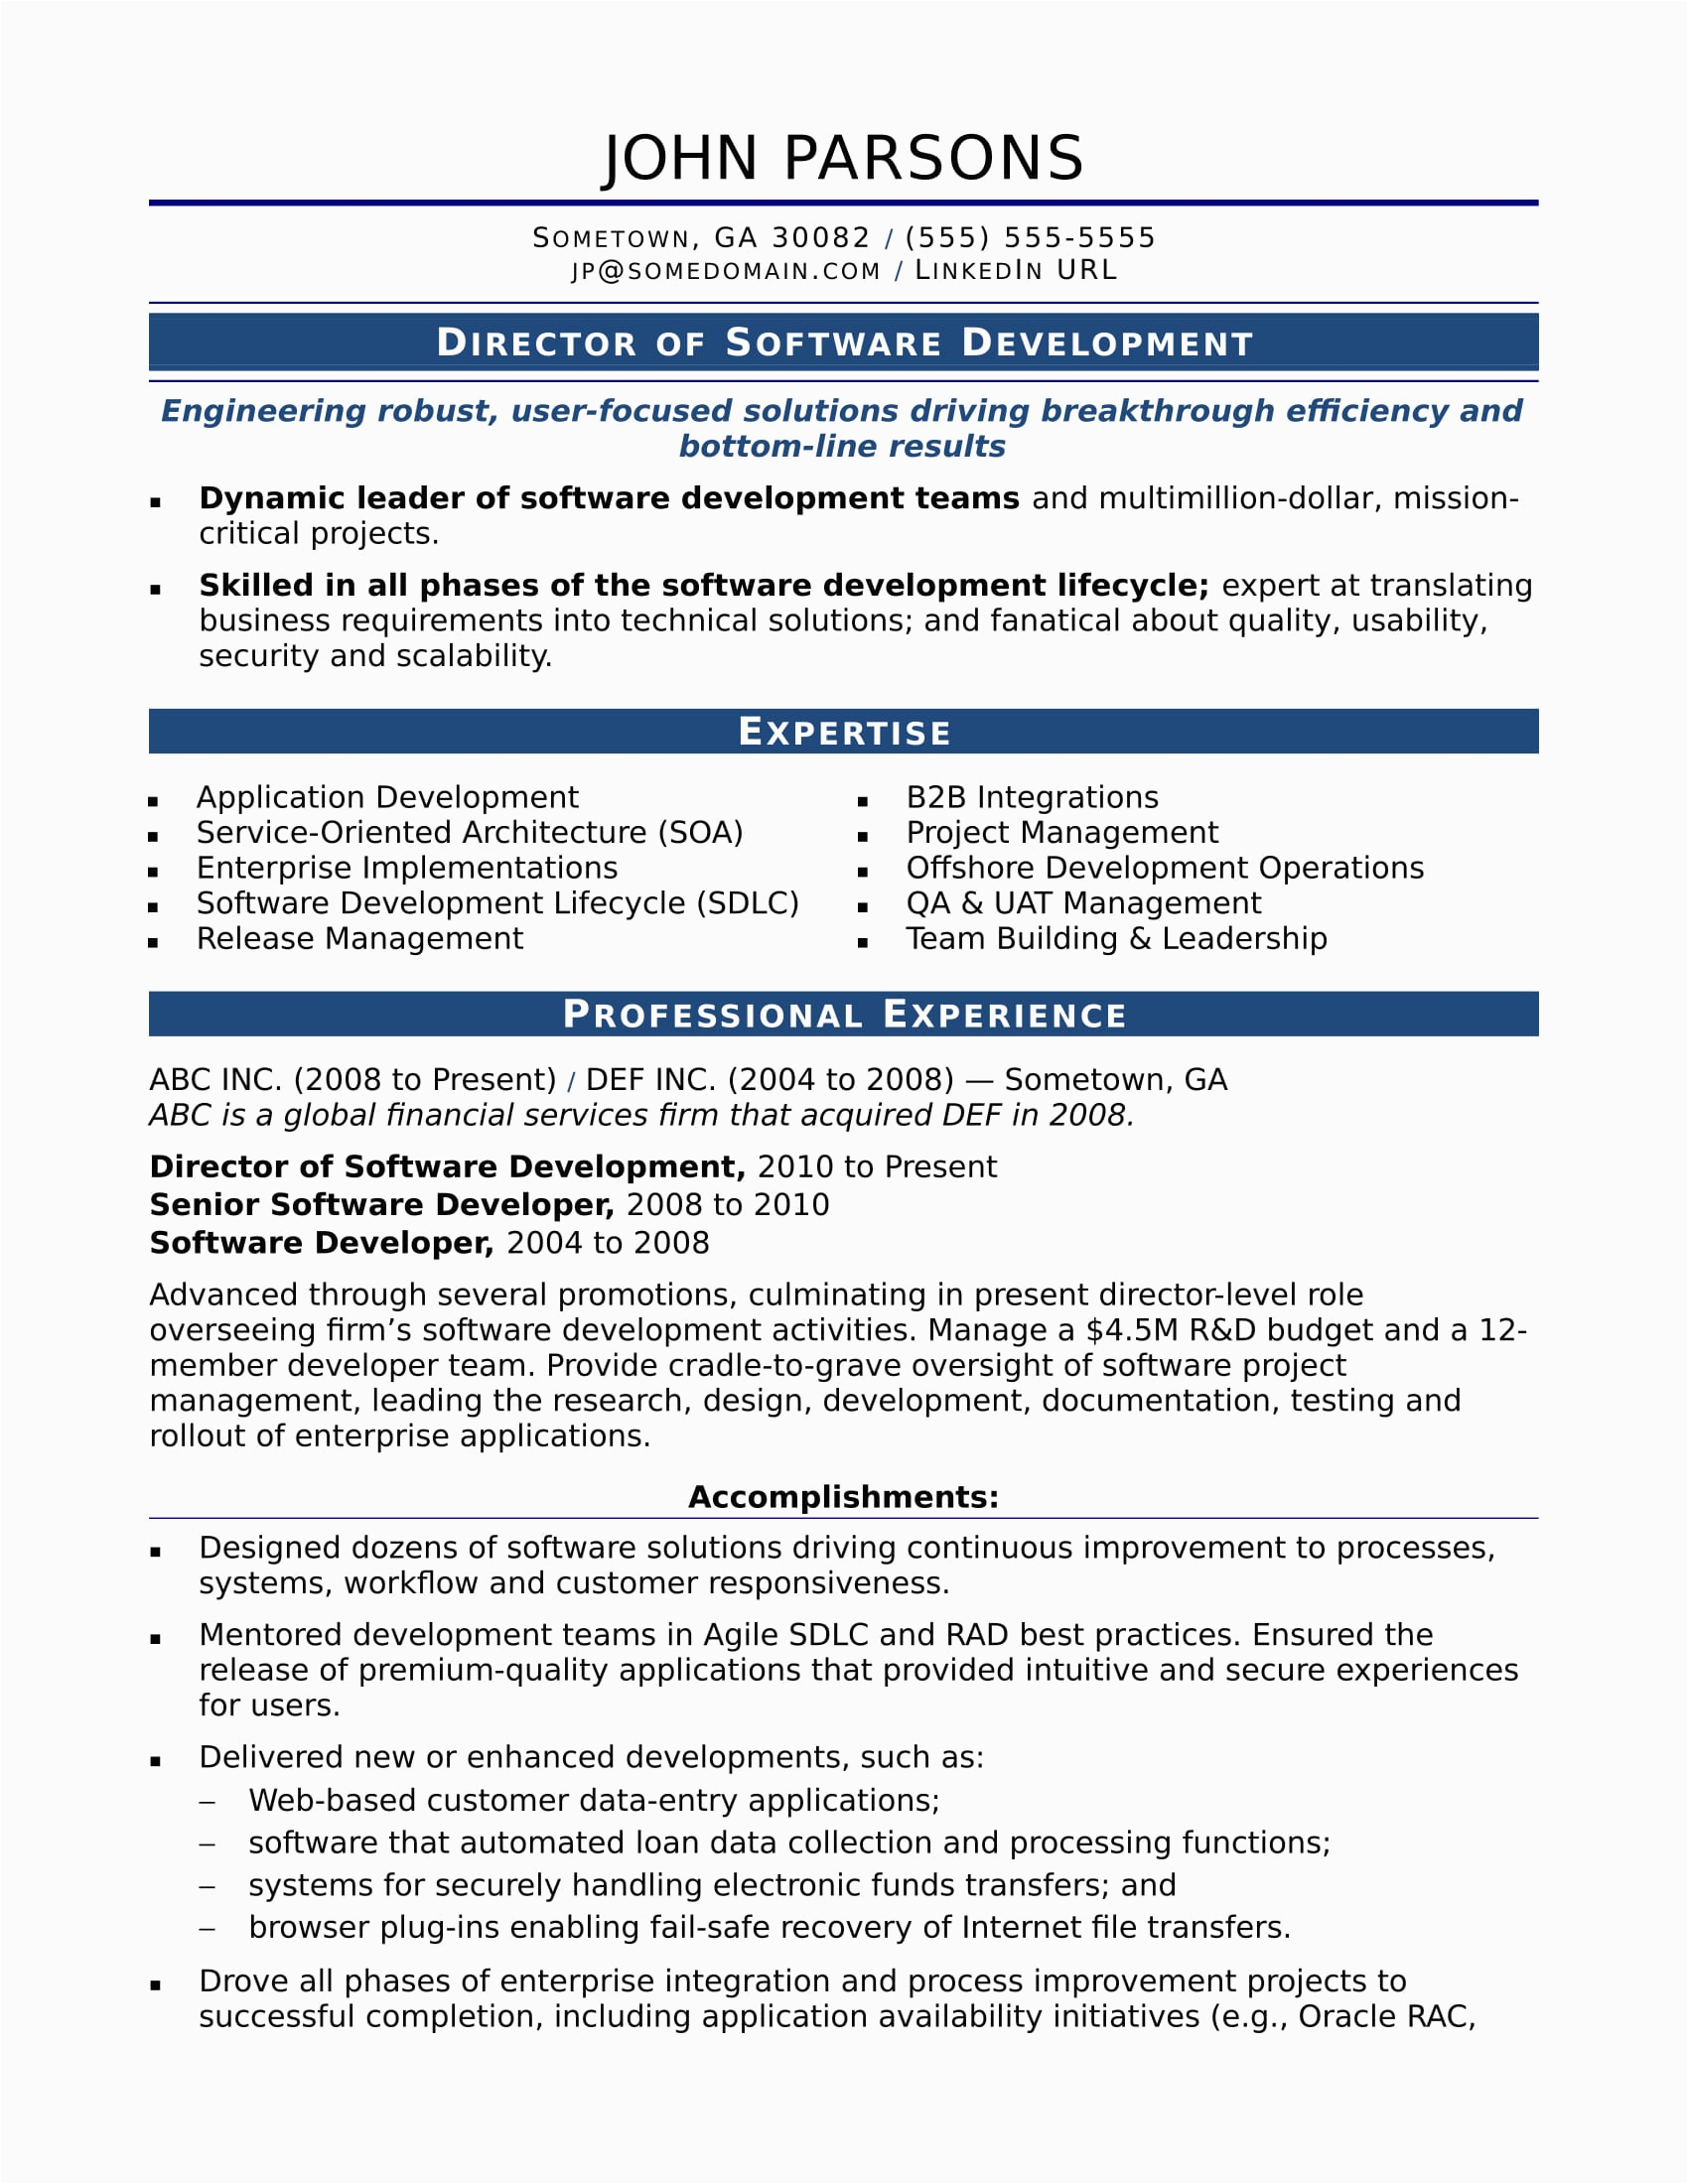 Resume Samples for Experienced software Professionals Sample Resume for An Experienced It Developer